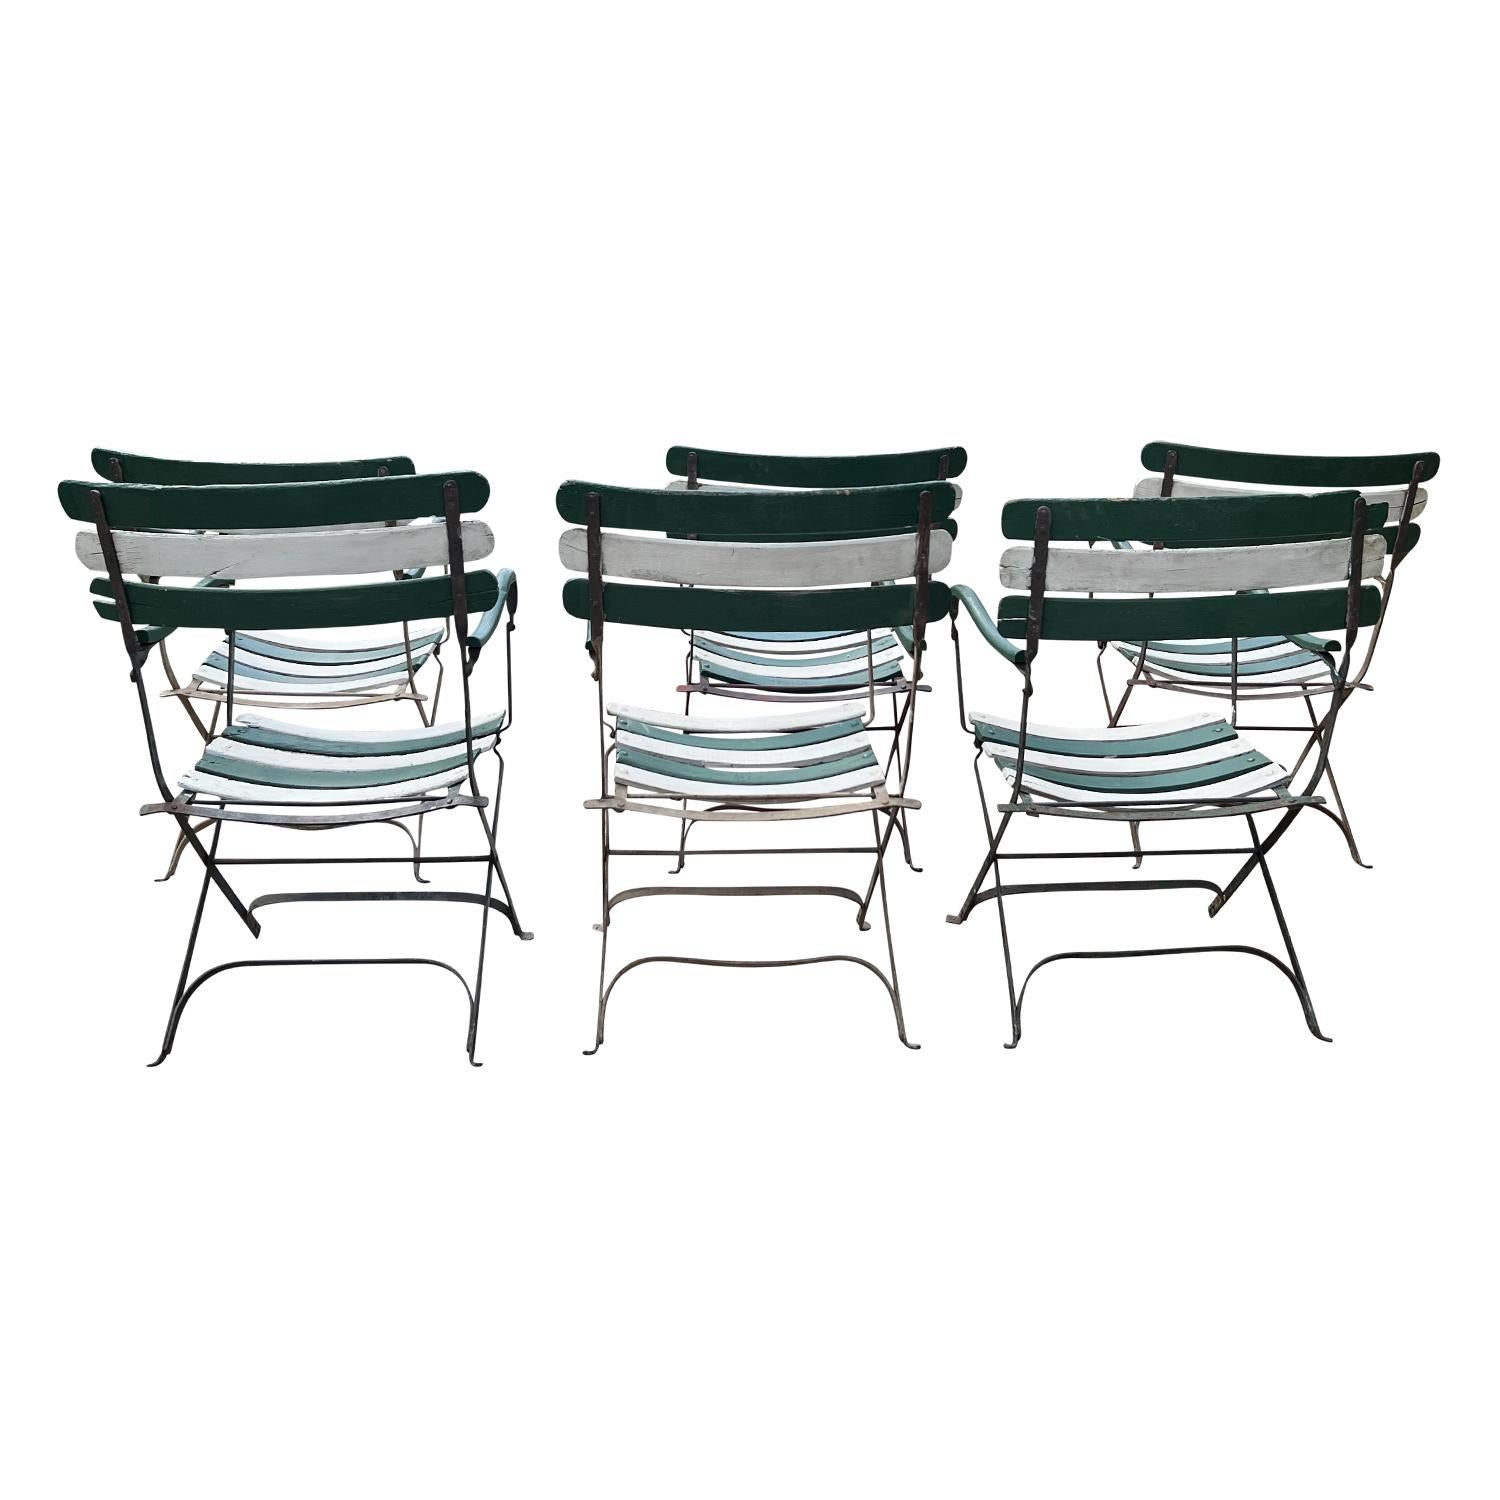 19th Century 19th - 20th Century French Set of Six Antique Wrought Iron Garden Chairs For Sale